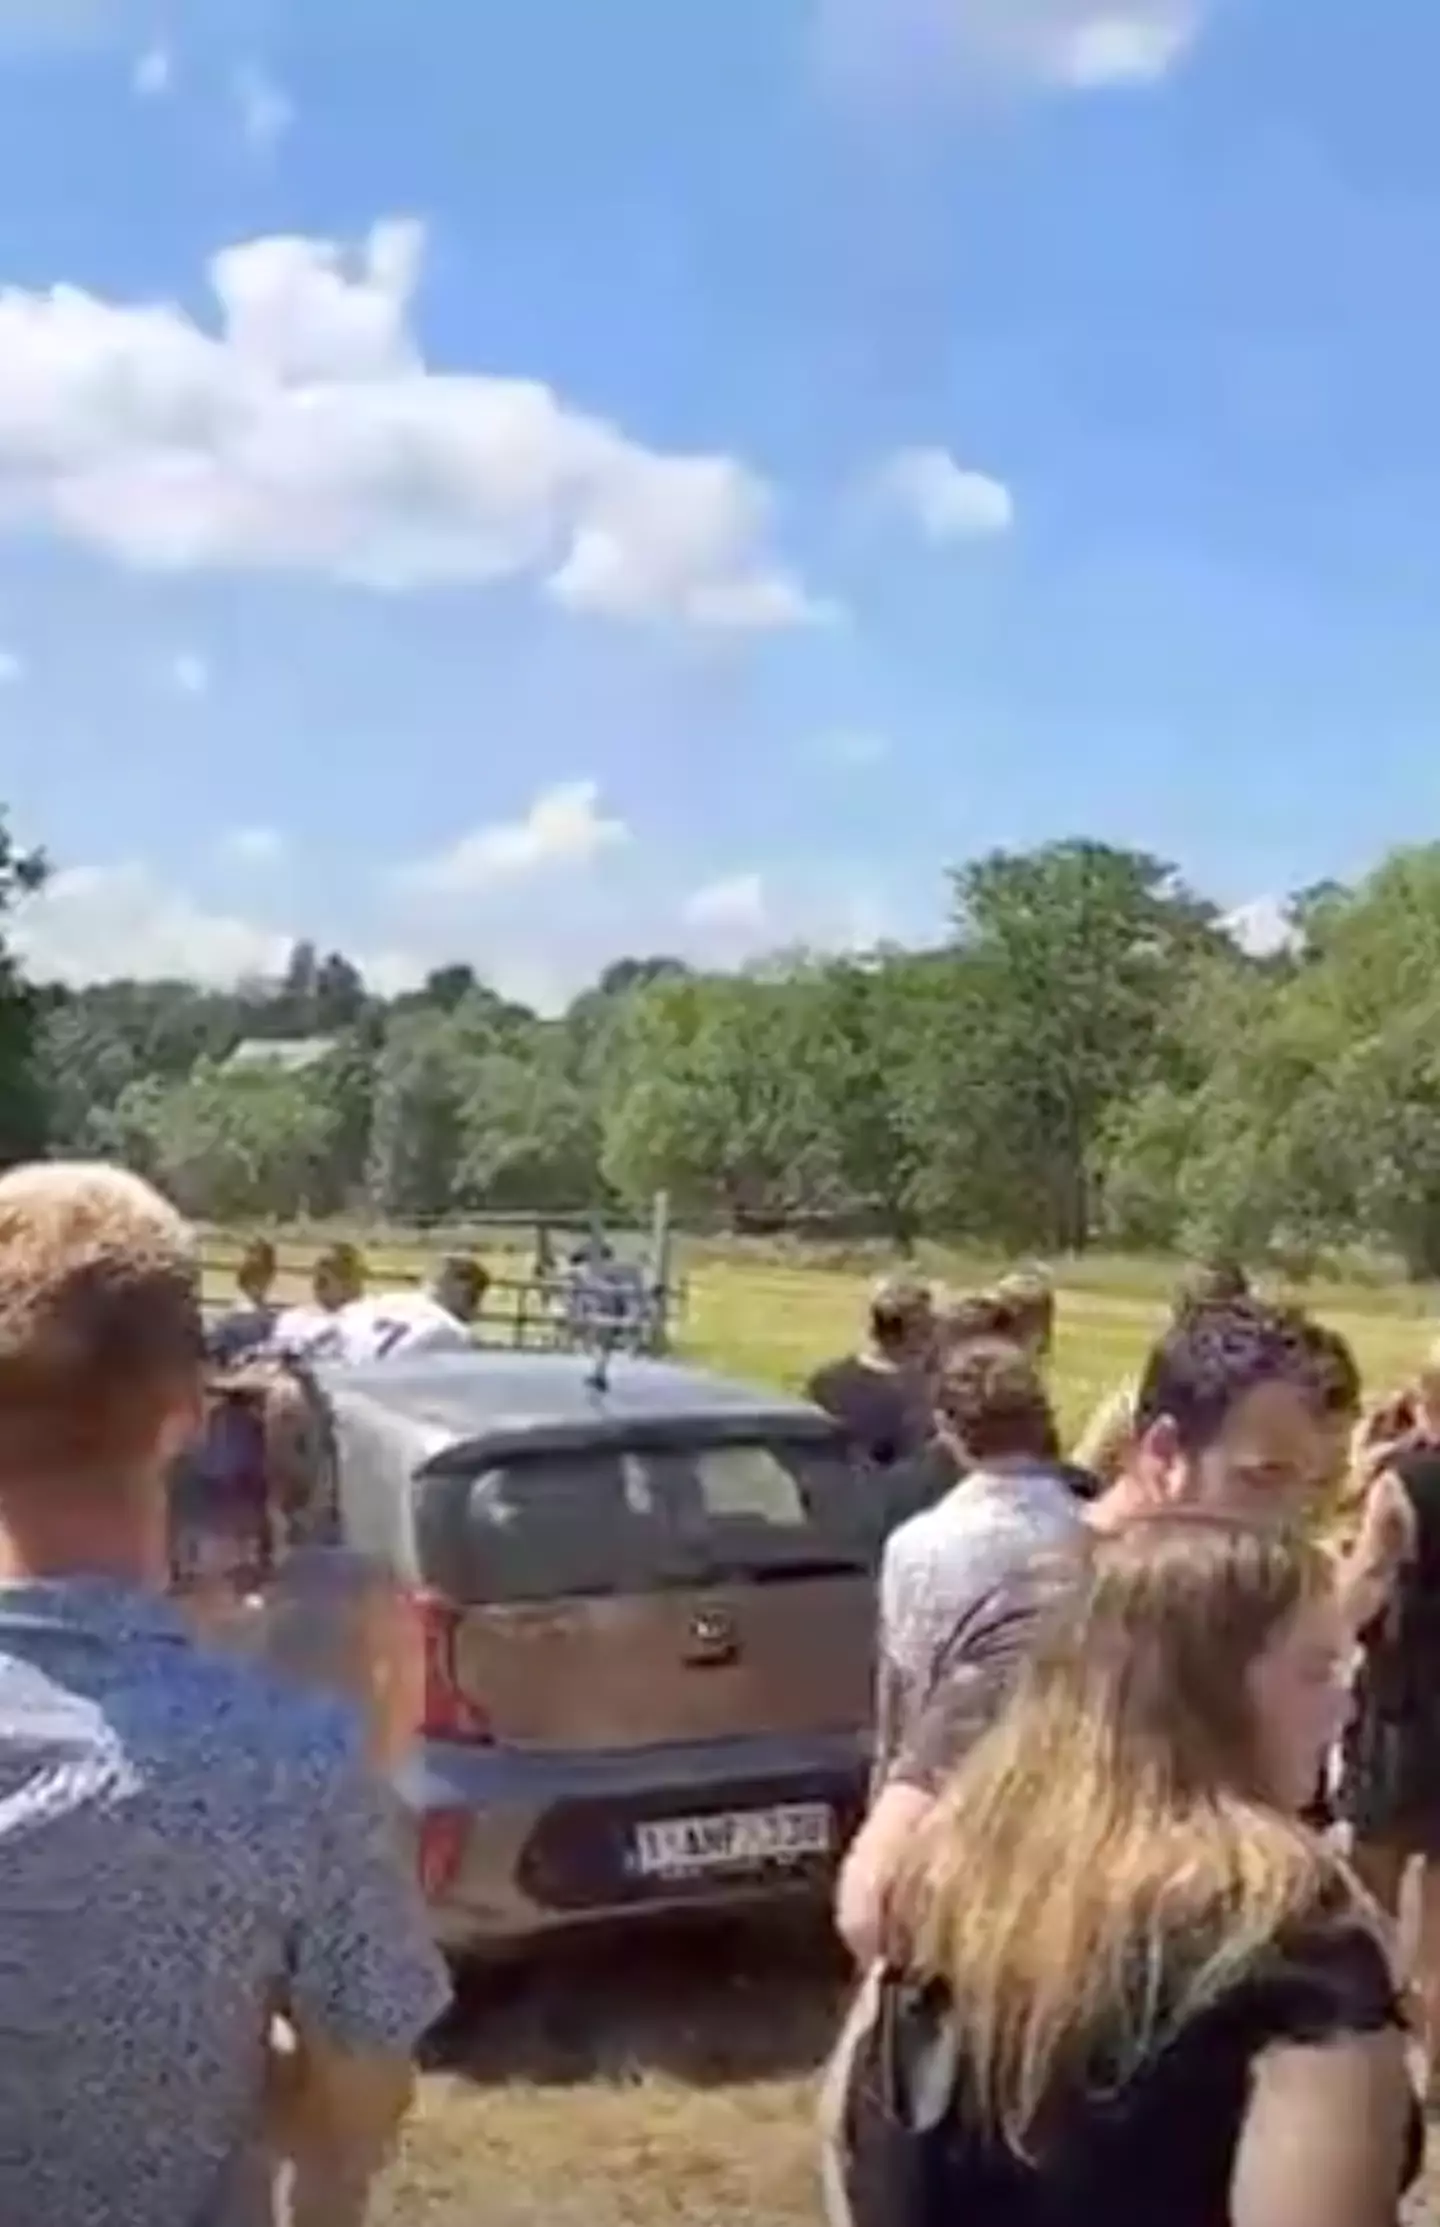 David Baerton made a rather dramatic entrance to his funeral, much to the shock of his family.